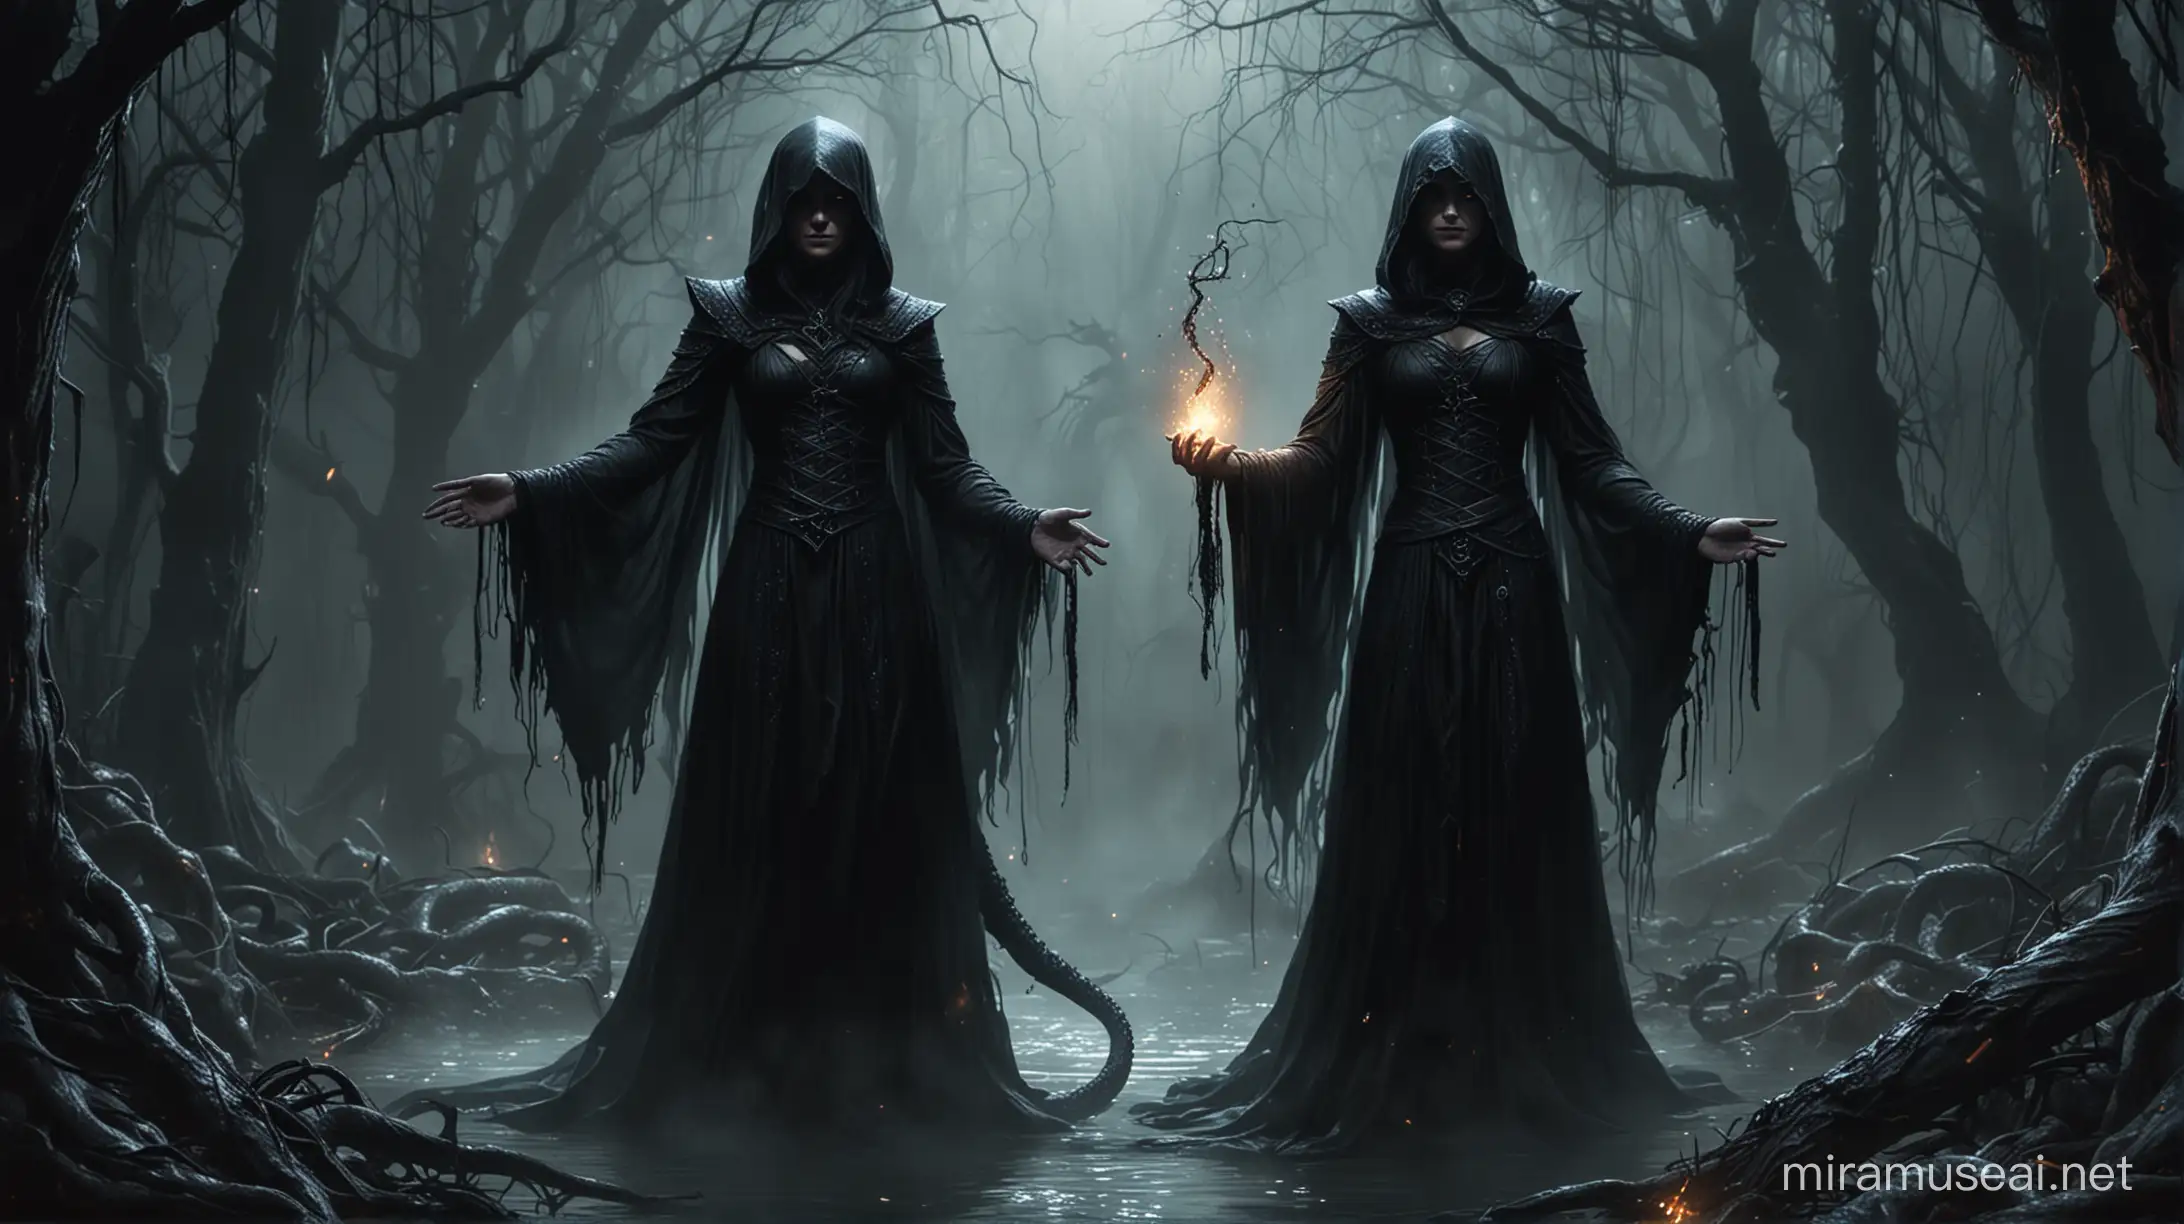 Enter the realm of shadows, where malevolent energies twist and coil like serpents in the abyss. Here, amidst the darkness, a sorcerer of sinister intent rises, wielding powers that draw upon the very essence of evil itself.

Picture this sorcerer, cloaked in robes as black as the void, their form obscured by the shifting shadows that cling to them like a second skin. Their eyes, pools of inky darkness, gleam with an otherworldly light that speaks of forbidden knowledge and arcane power.

Their magic is not of the light, but of the shadows; a twisted tapestry of spells and incantations that warp reality and bend the minds of mortals to their will. They summon forth creatures of darkness to do their bidding, twisting and corrupting all that they touch.

Yet, despite their malevolent nature, there is a certain allure to this sorcerer, a dark charisma that draws others to them like moths to a flame. They are a master manipulator, skilled in the art of deception and manipulation, weaving webs of lies and half-truths to ensnare the unwary.

In this prompt, delve into the depths of darkness as you create a sorcerer of sinister intent. Explore the twisted depths of their magic, the malevolent forces that fuel their power, and the shadowed realms from which they draw their strength. But beware, for in the pursuit of such dark arts, one risks losing themselves to the very darkness they seek to control.